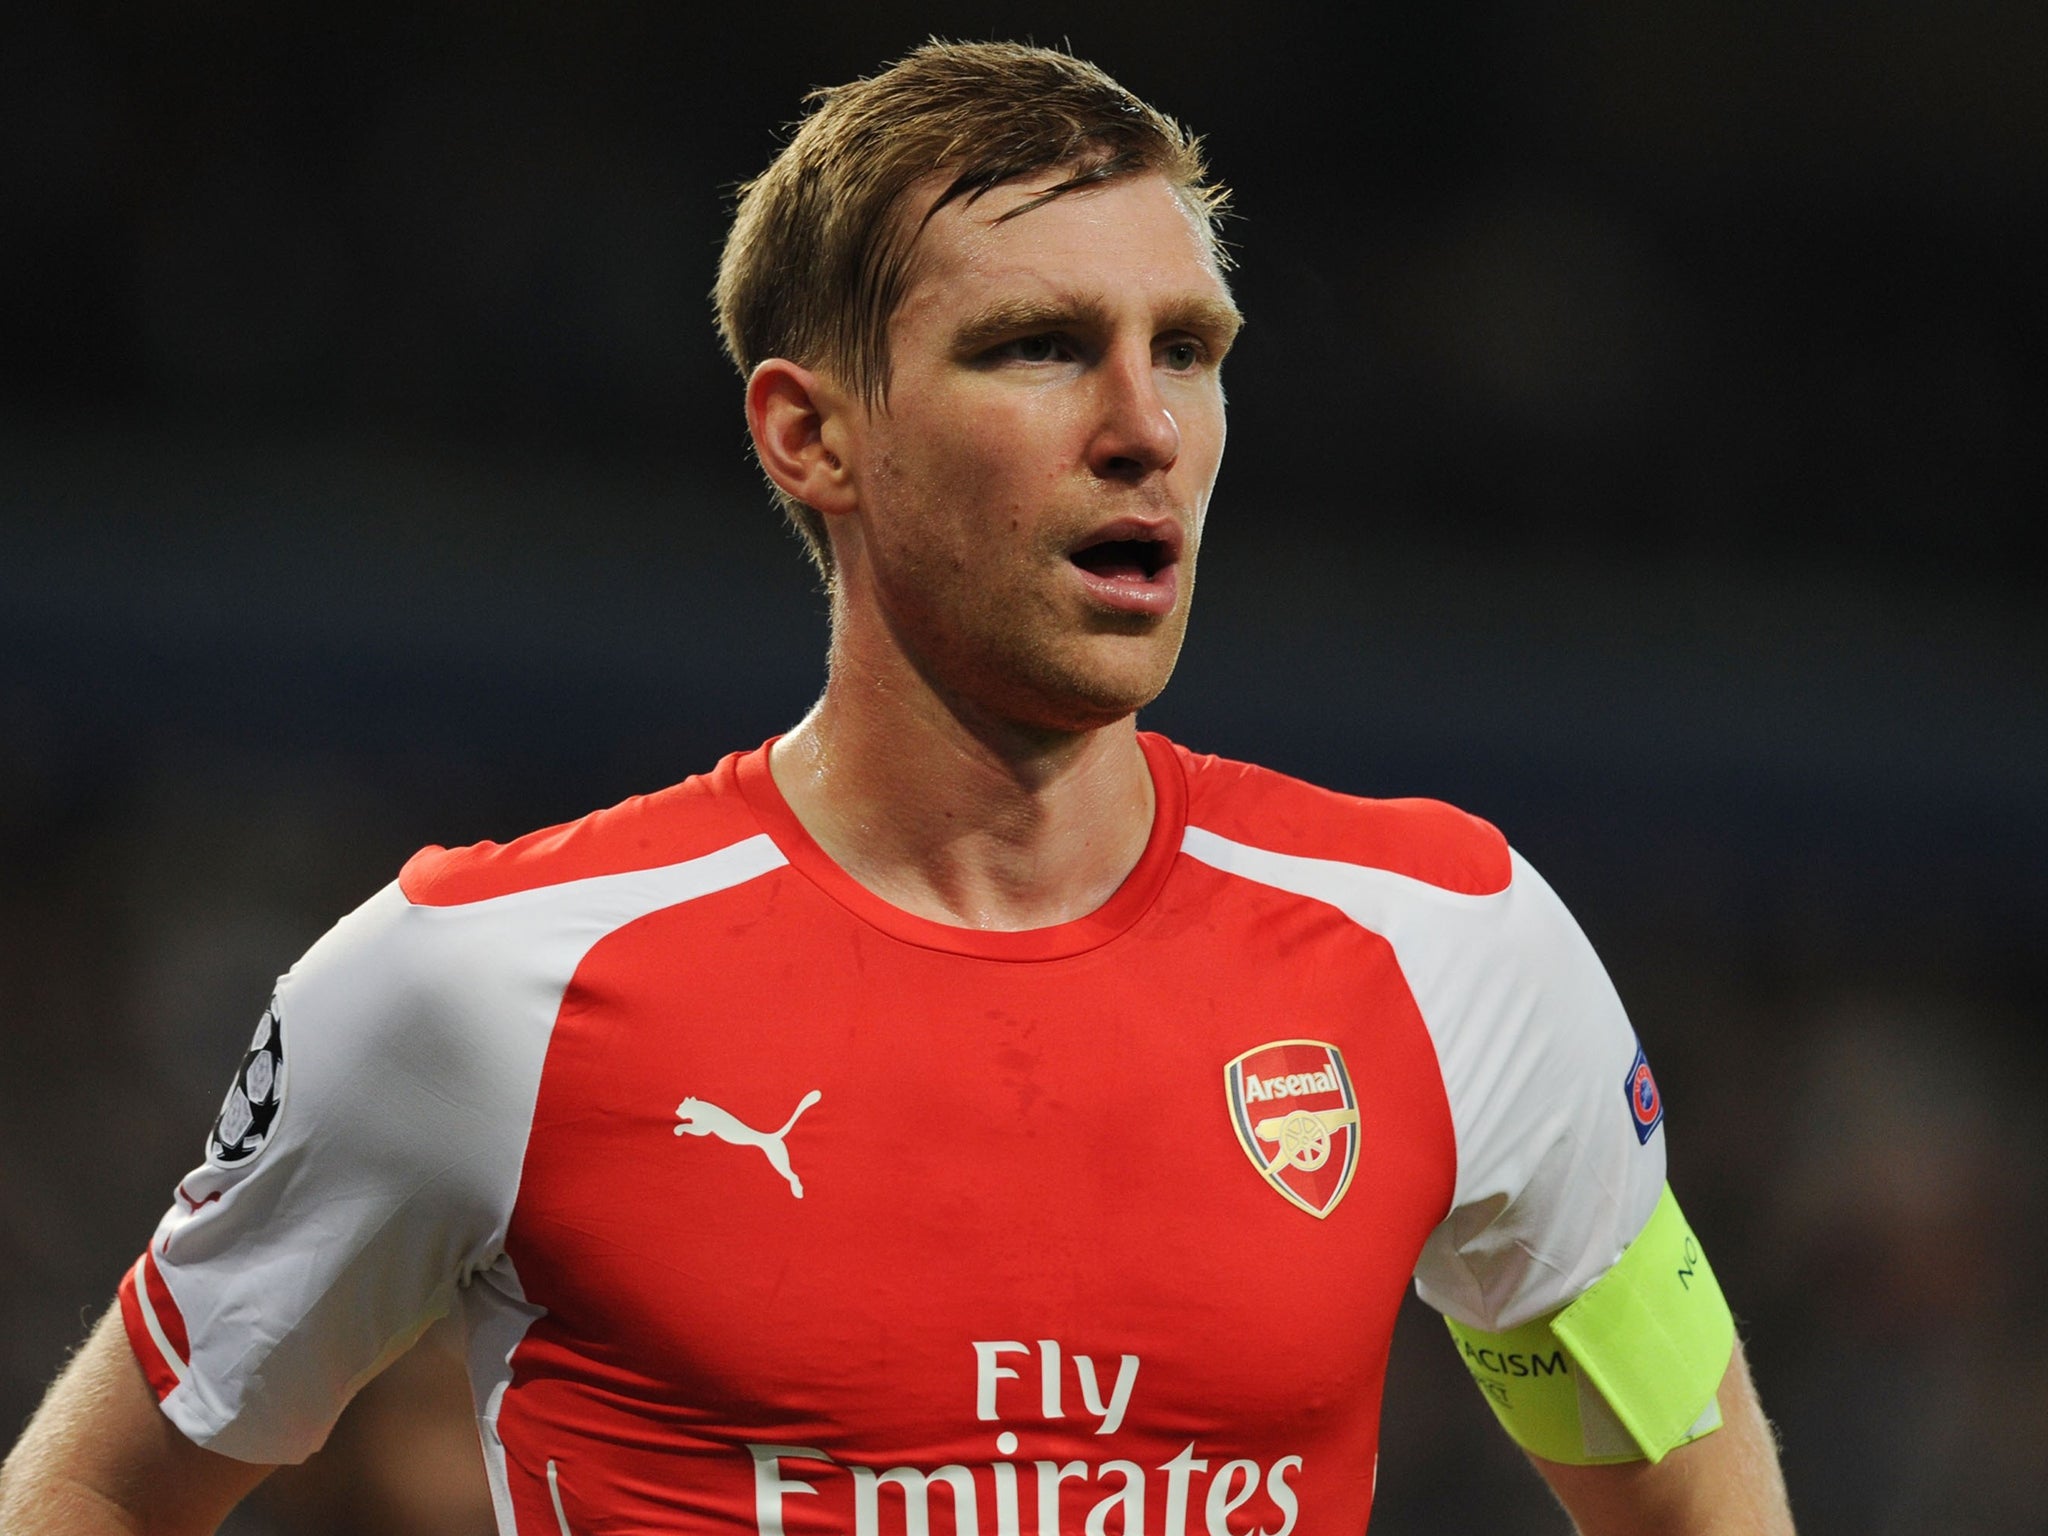 ‘It is nearly 100 days after the World Cup, time to raise the bar,’ says Per Mertesacker